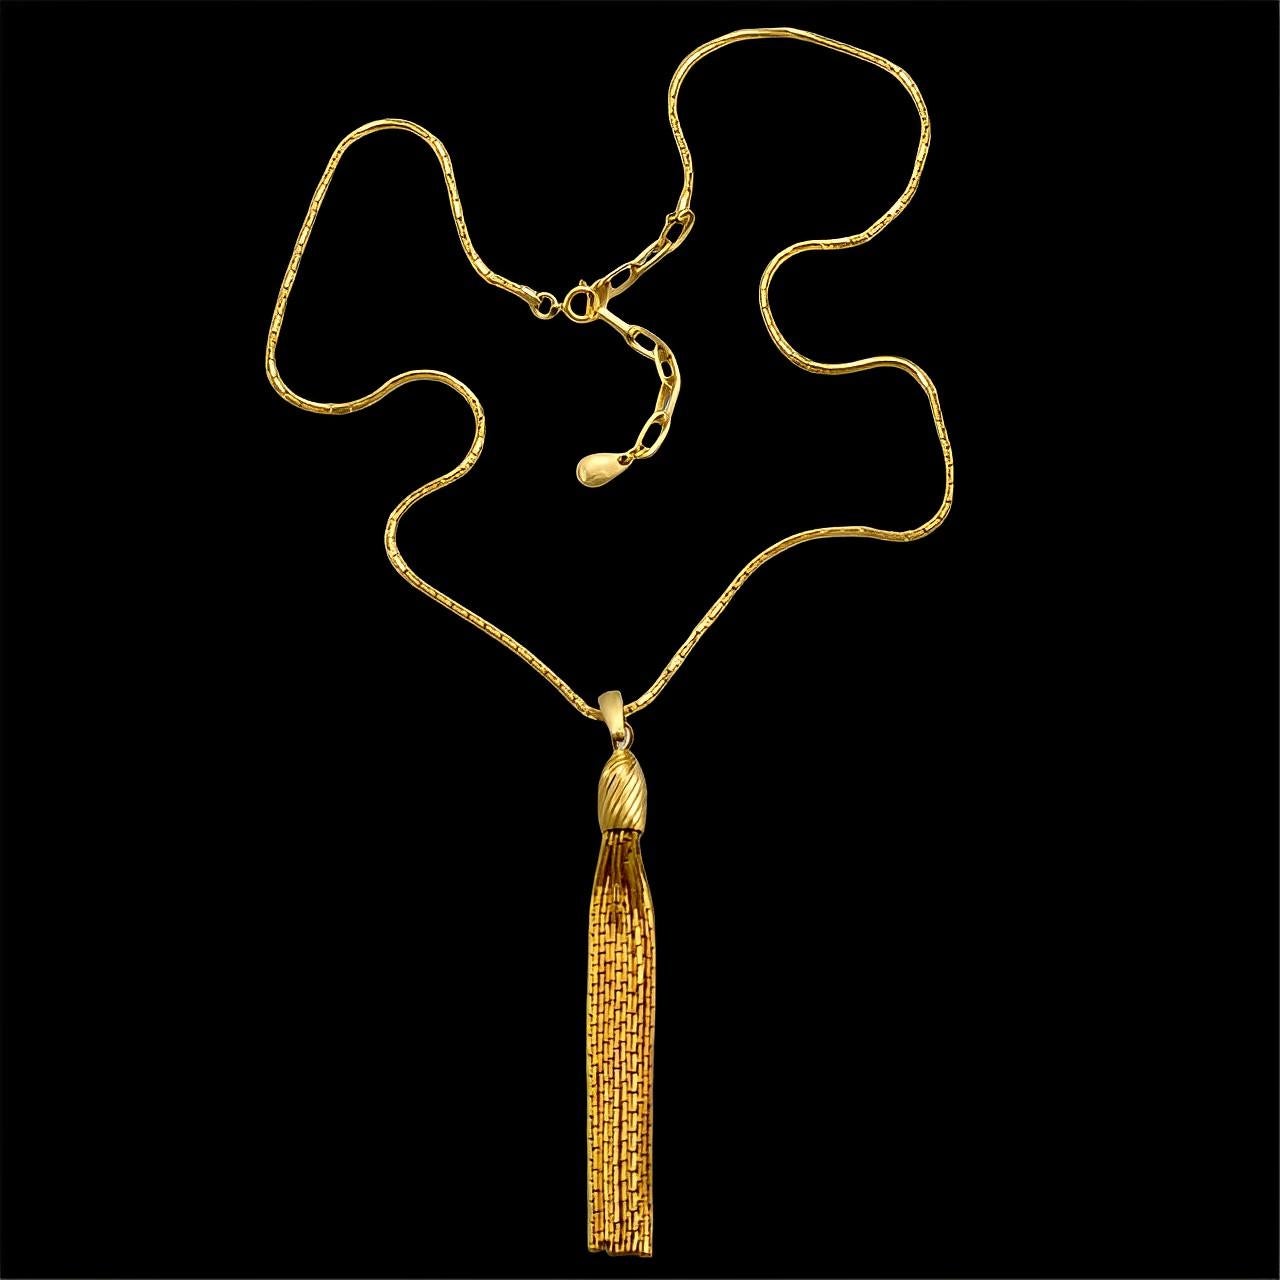 Gold Plated Elongated Box Chain Tassel Necklace circa 1980s For Sale 4